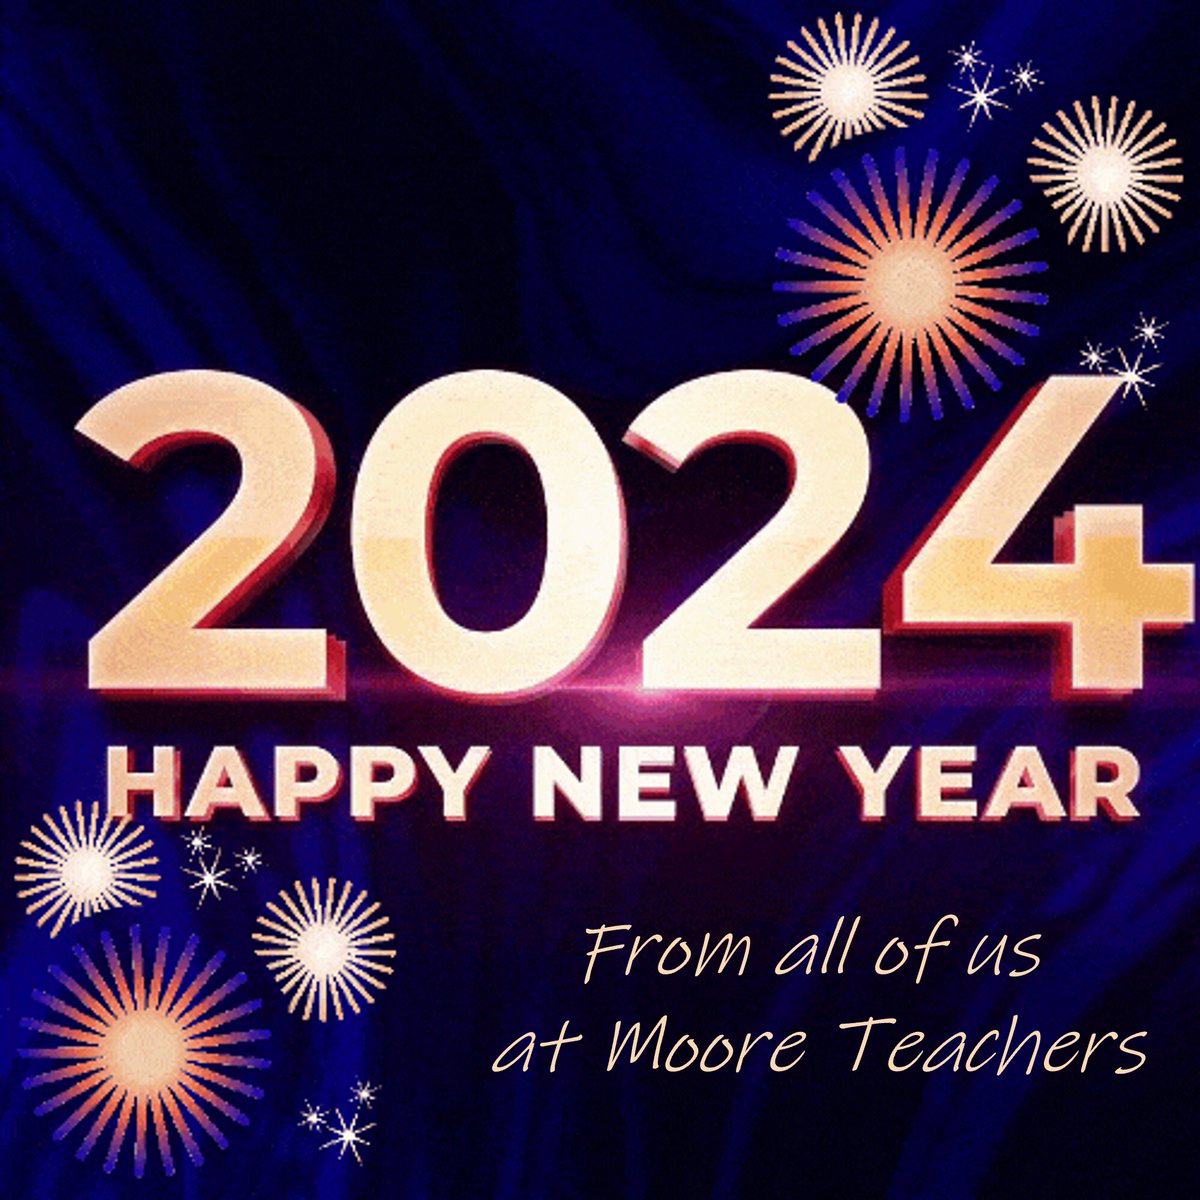 Wishing you all a Happy New Year and fantastic 2024 from all of us at Moore Teachers! 🎉
#hertfordshire #essex #teaching #education #school #supplyteacher